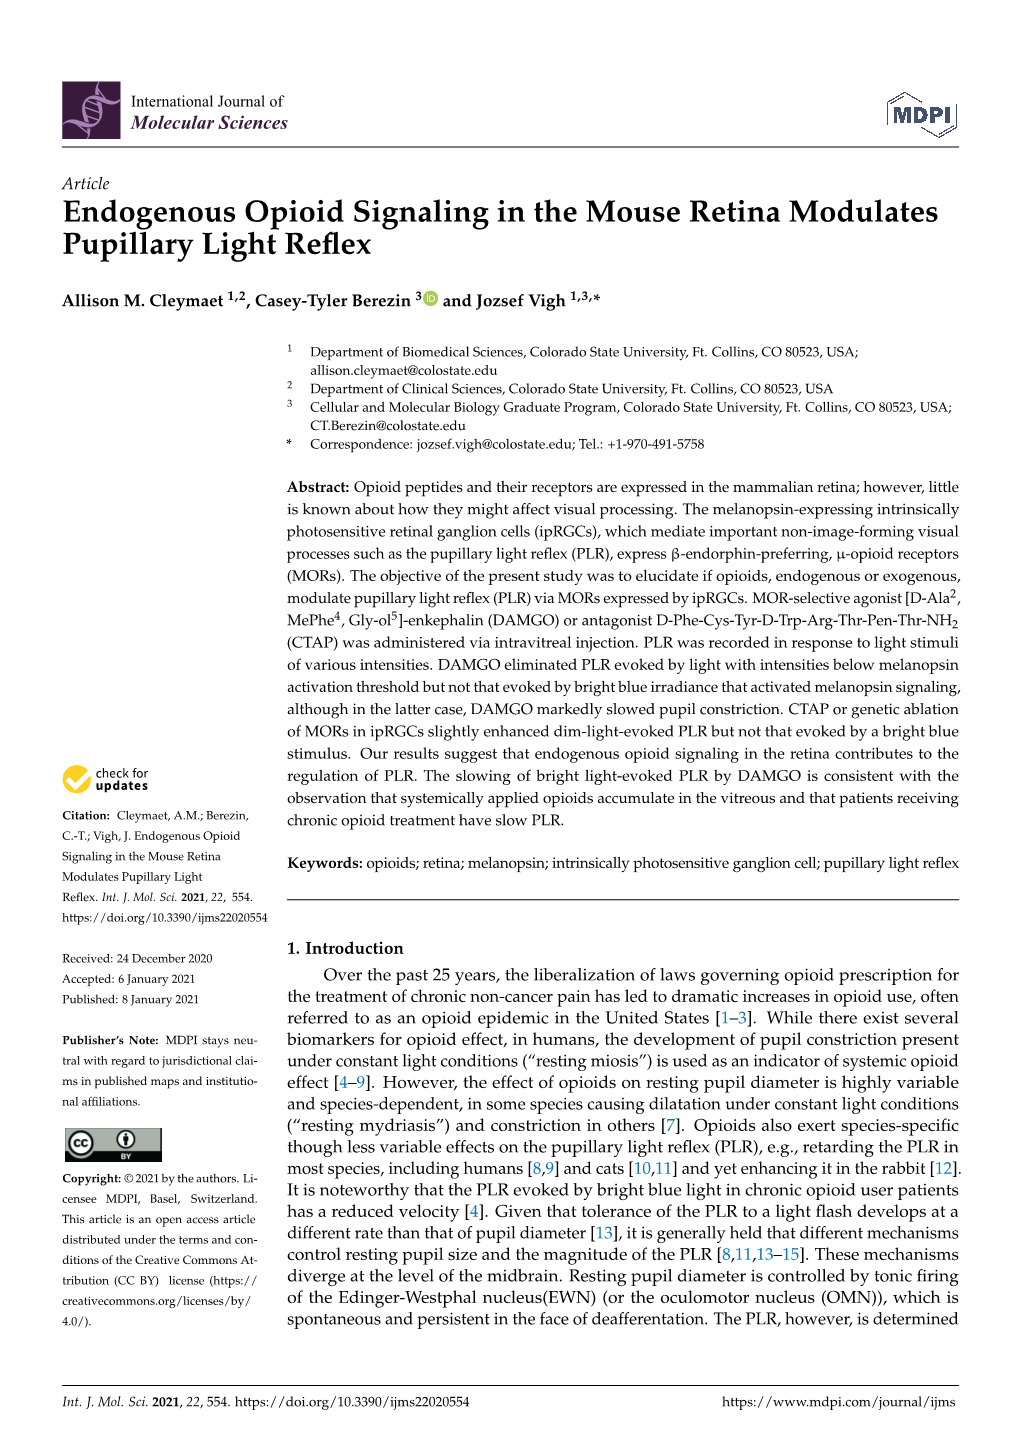 Endogenous Opioid Signaling in the Mouse Retina Modulates Pupillary Light Reﬂex